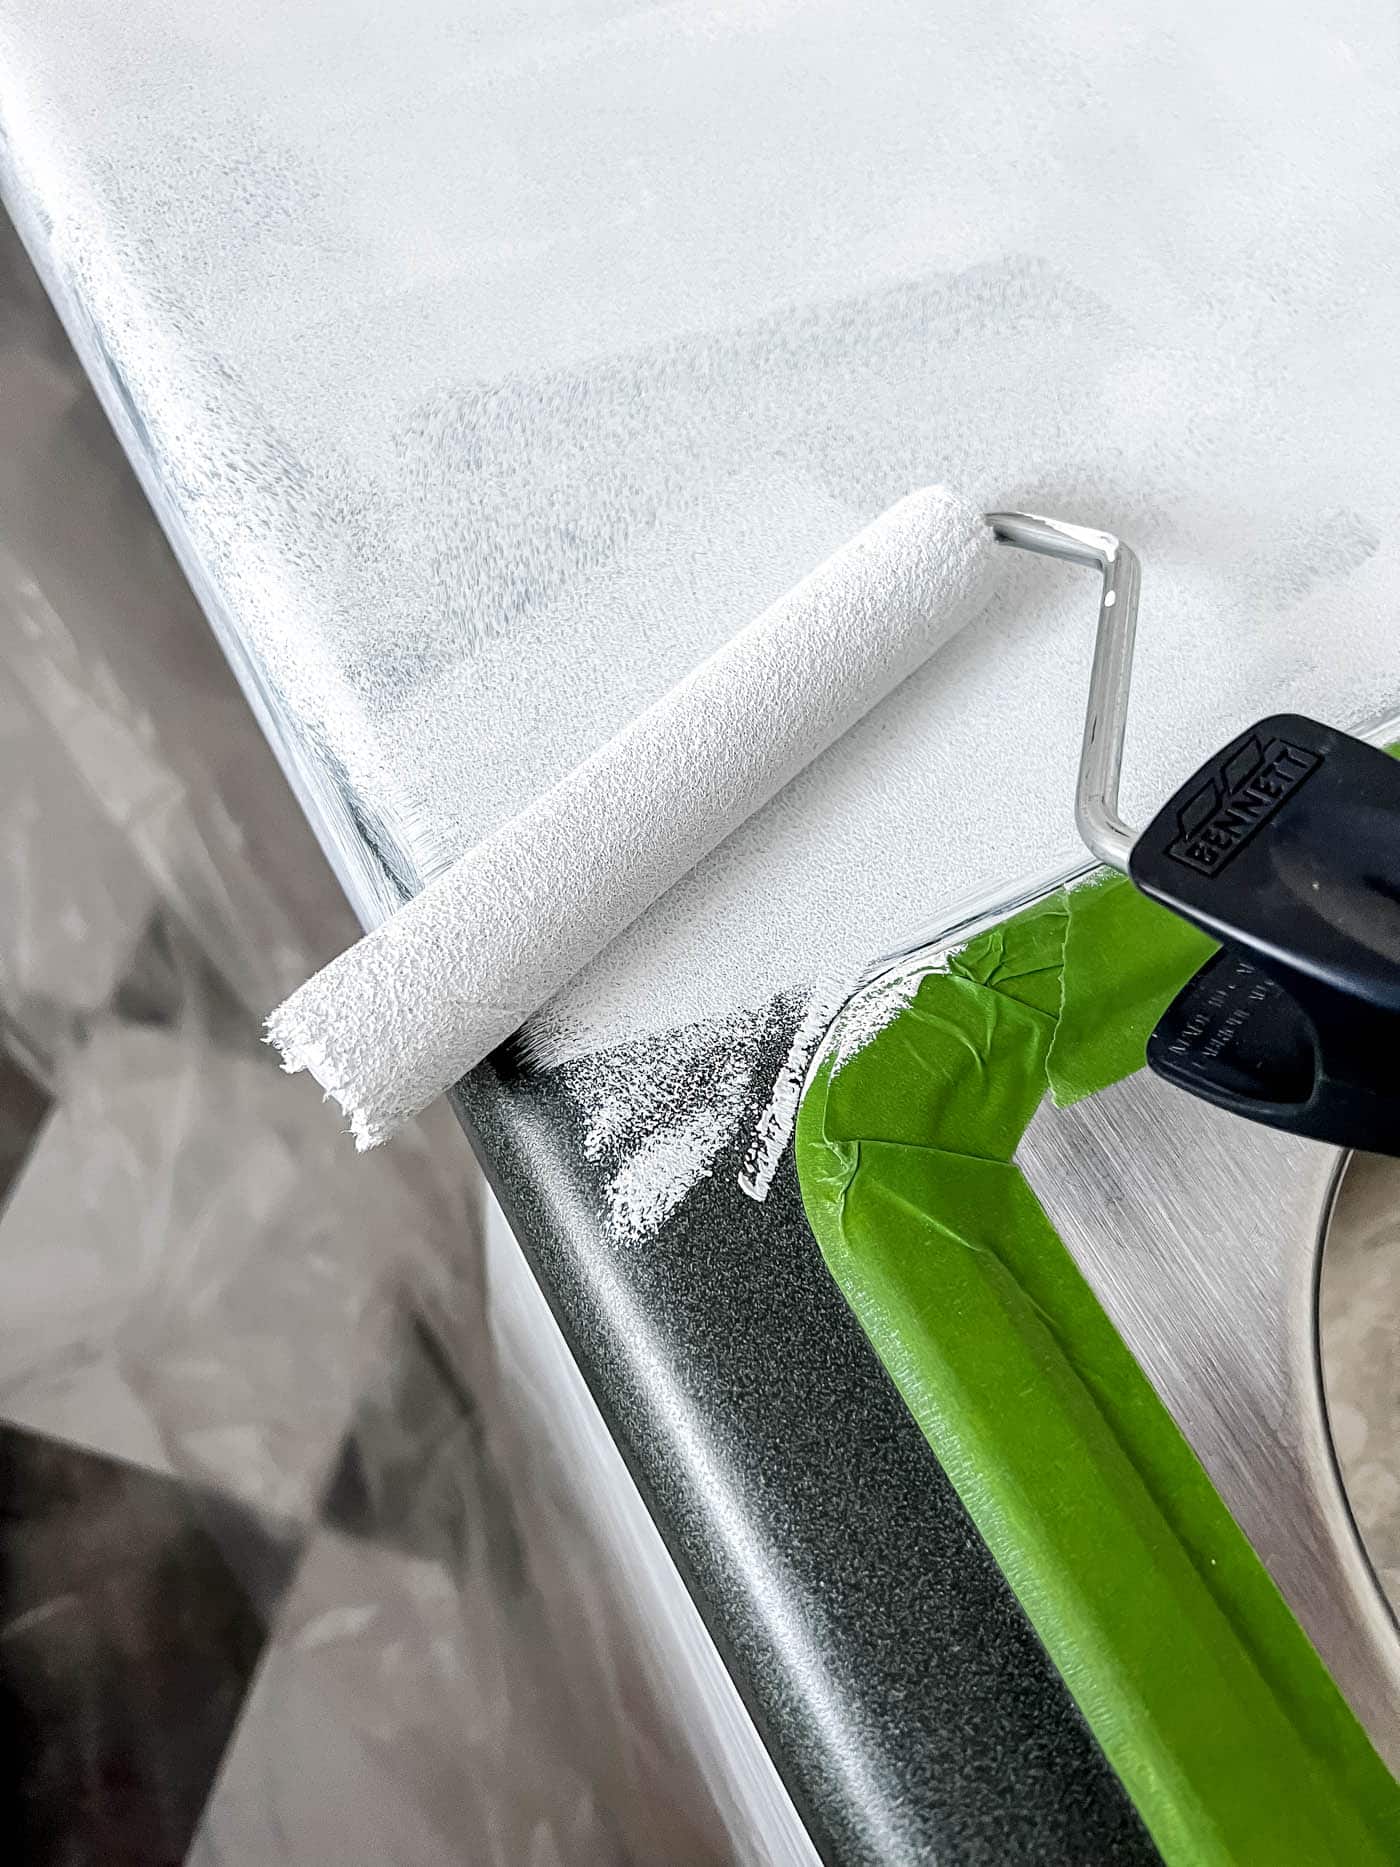 Paint flat surfaces with a fabric roller brush